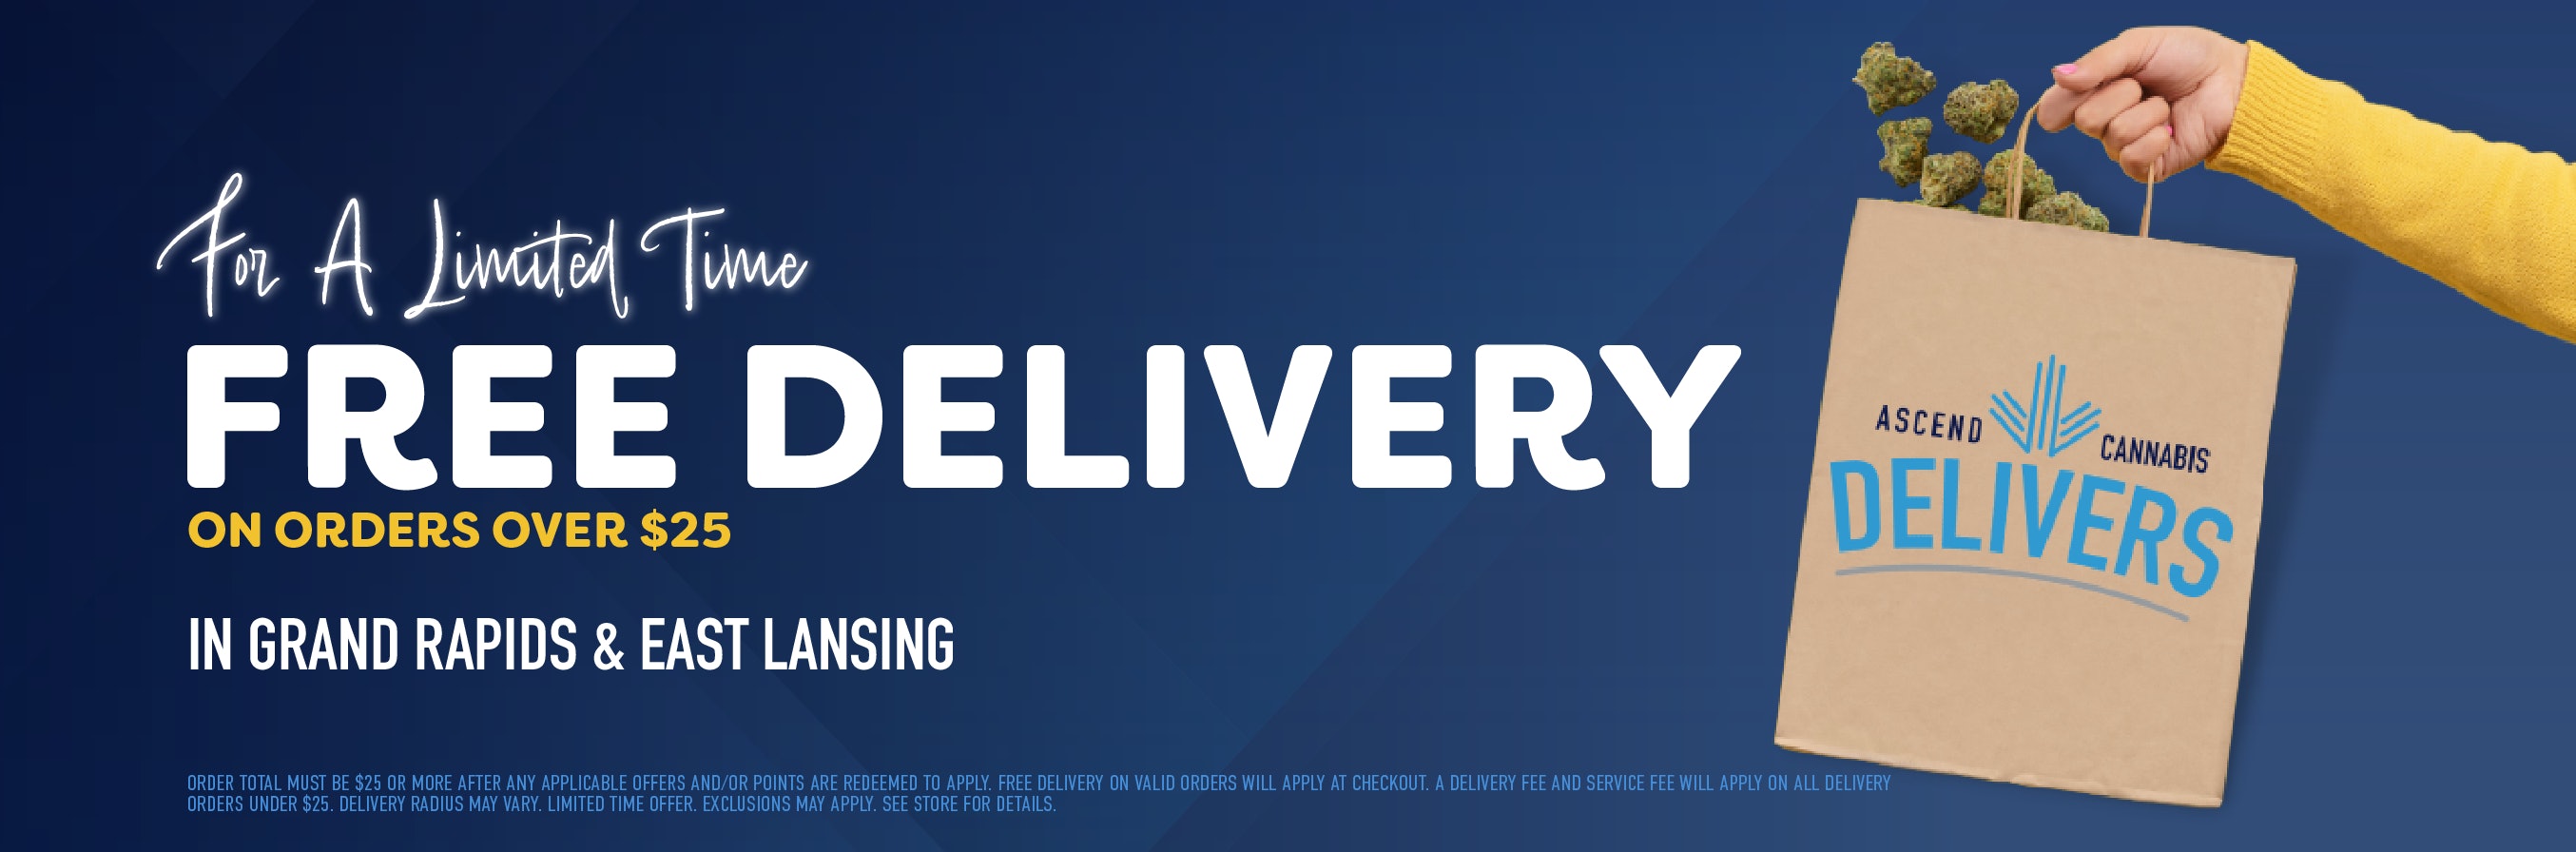 Delivery 2